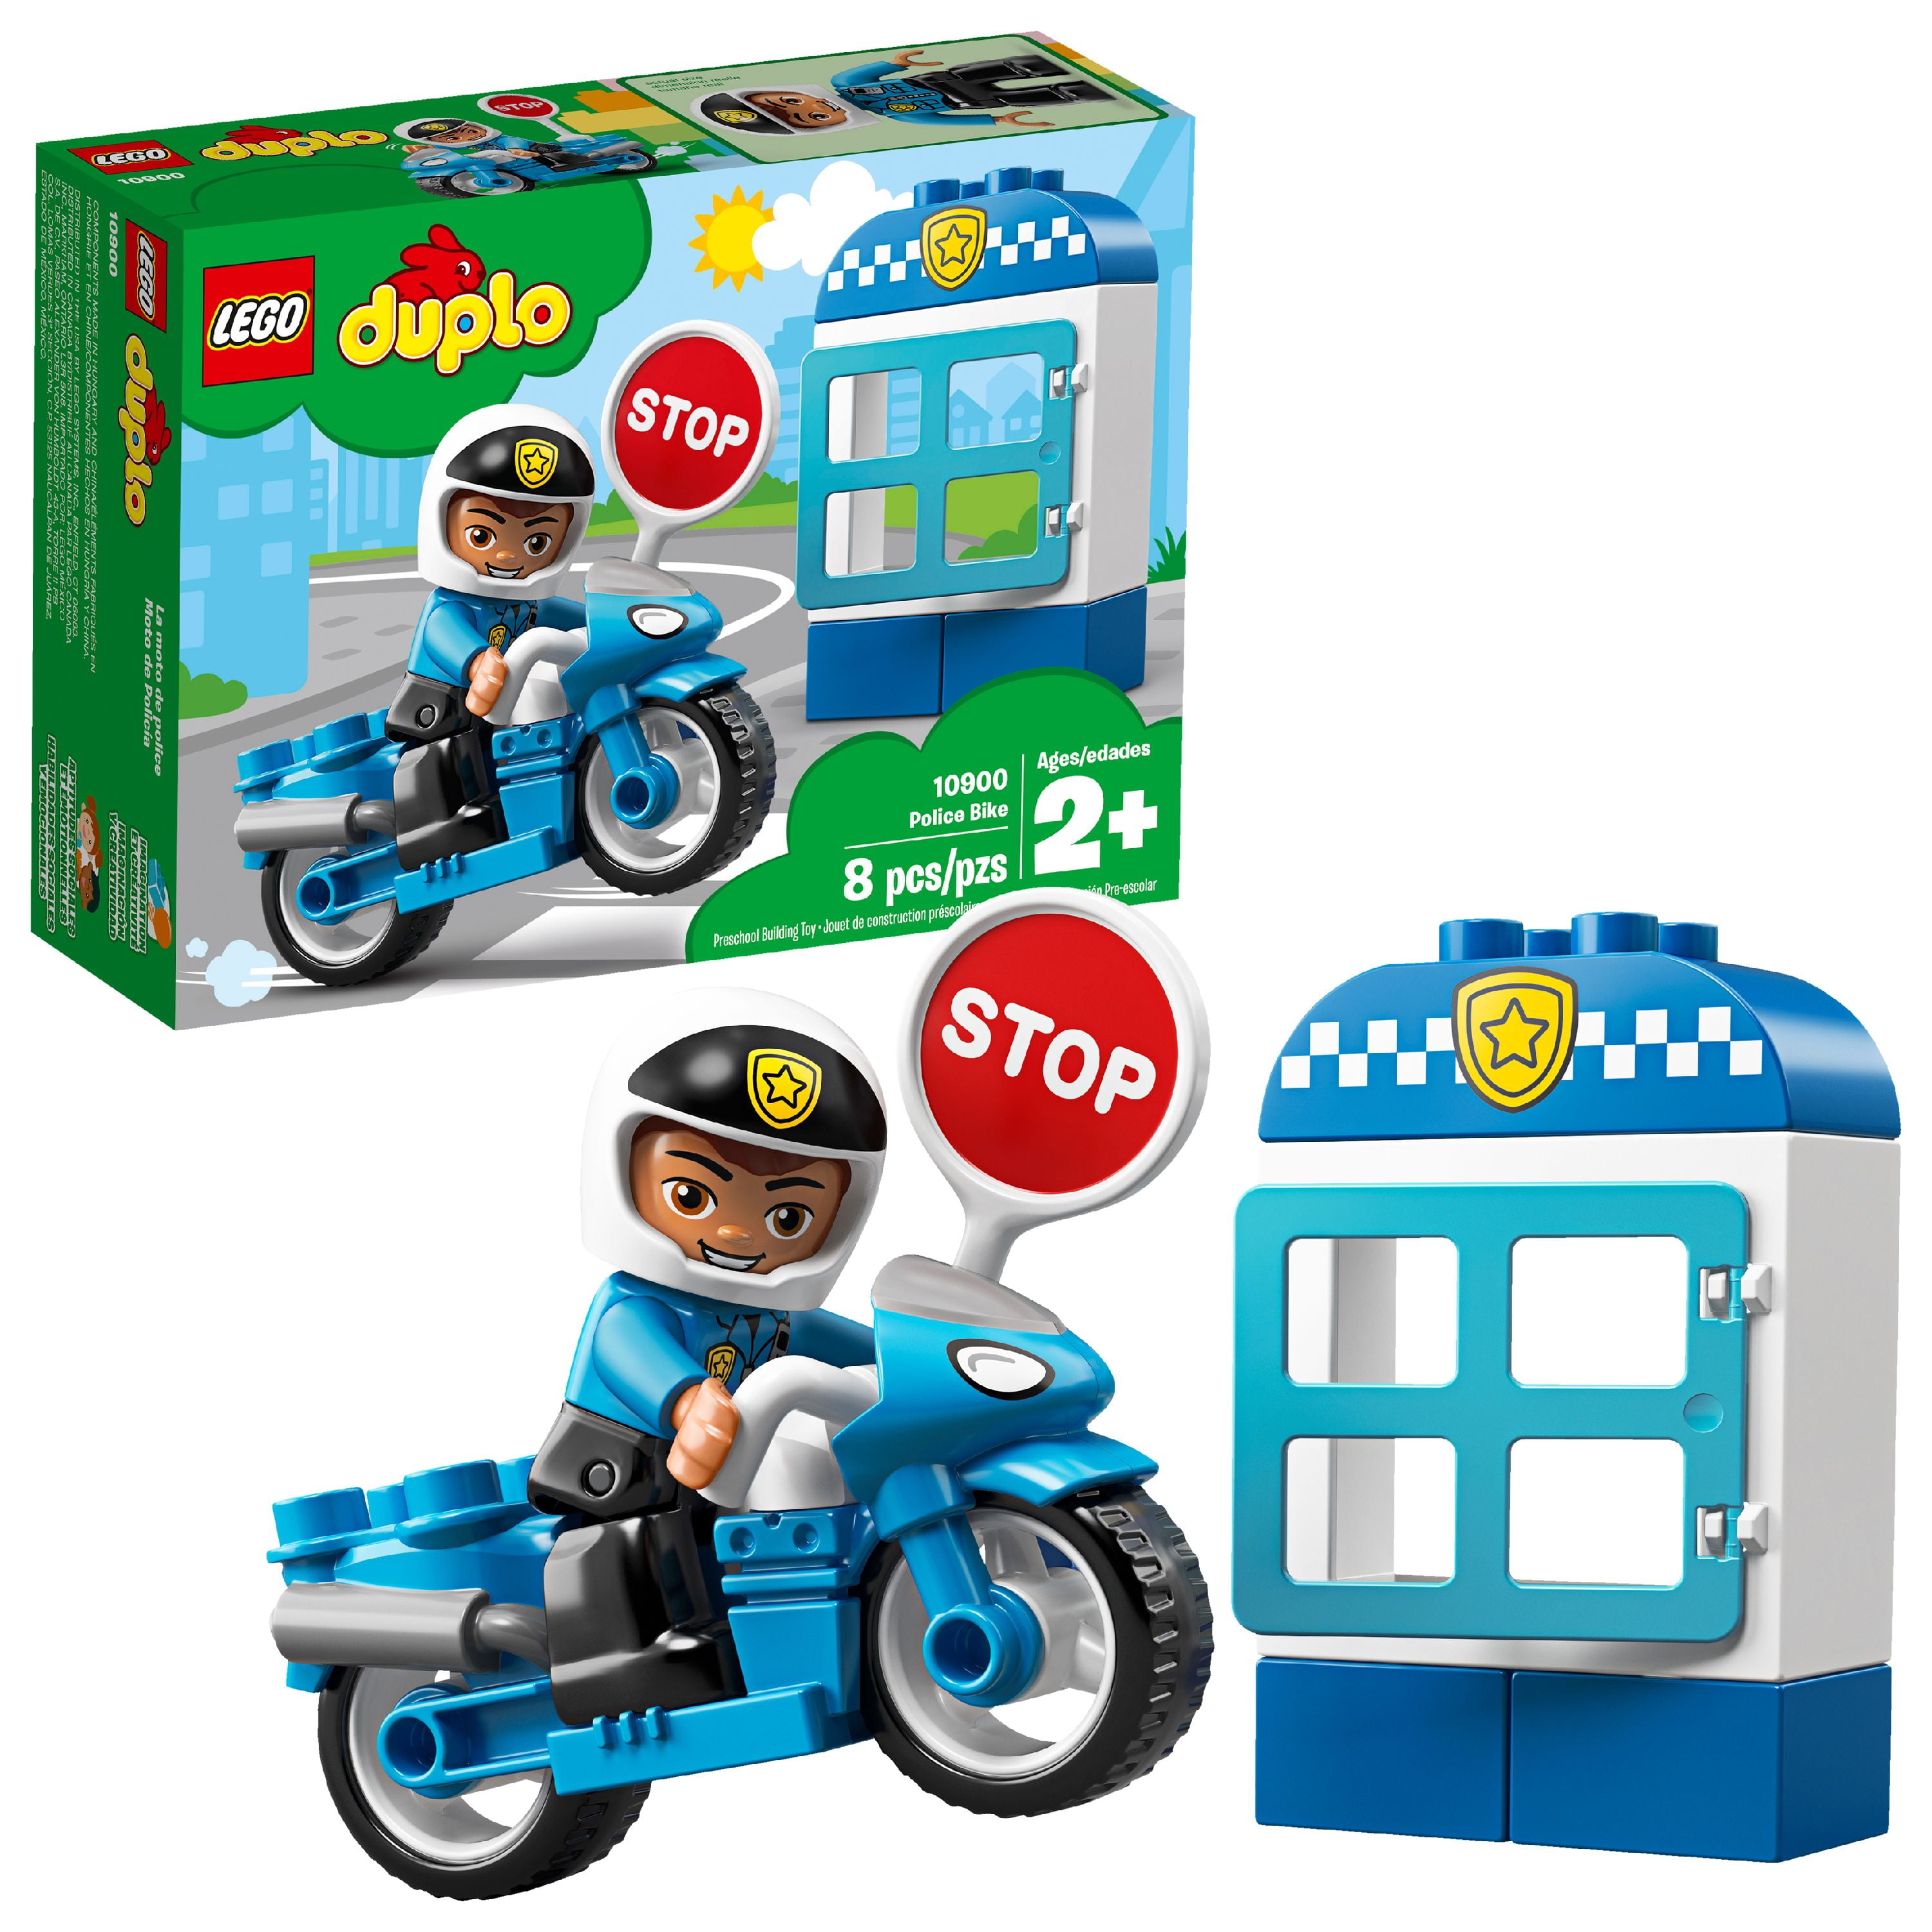 Lego Duplo Figure Motorcycle Police Officer Vintage approx. 2001 